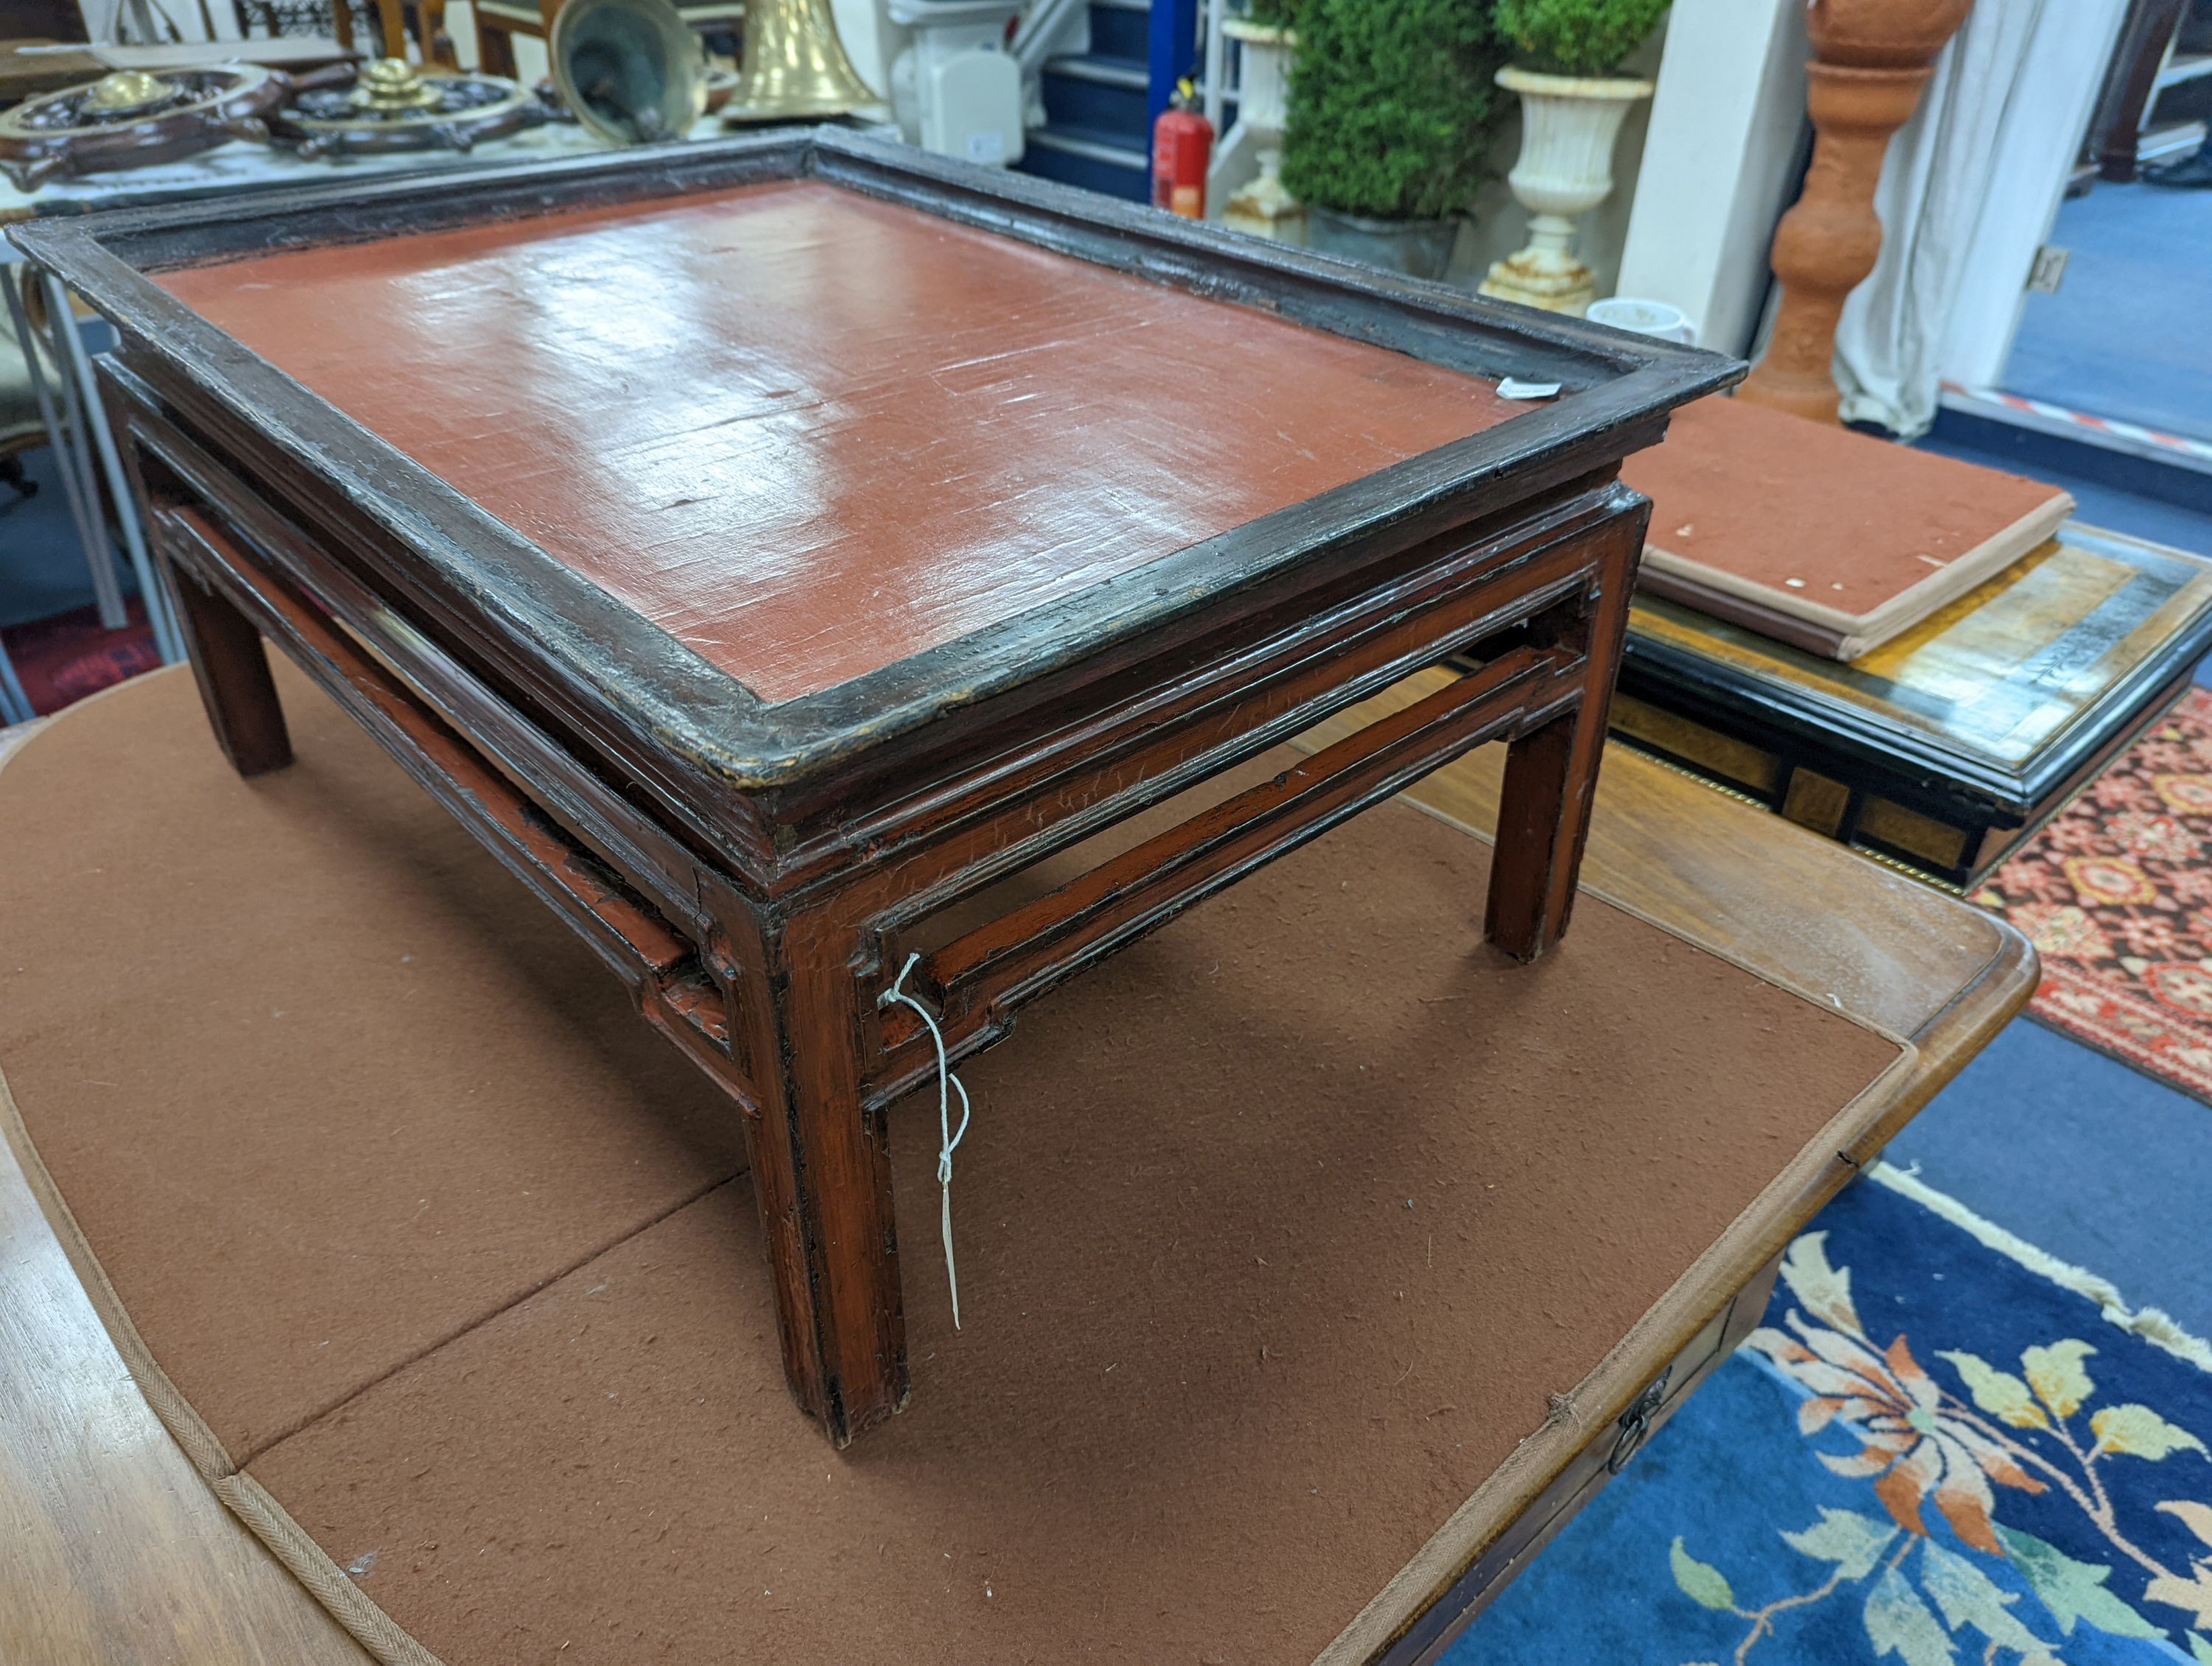 A Chinese rectangular lacquer low table, width 73cm, depth 52cm, height 33cm